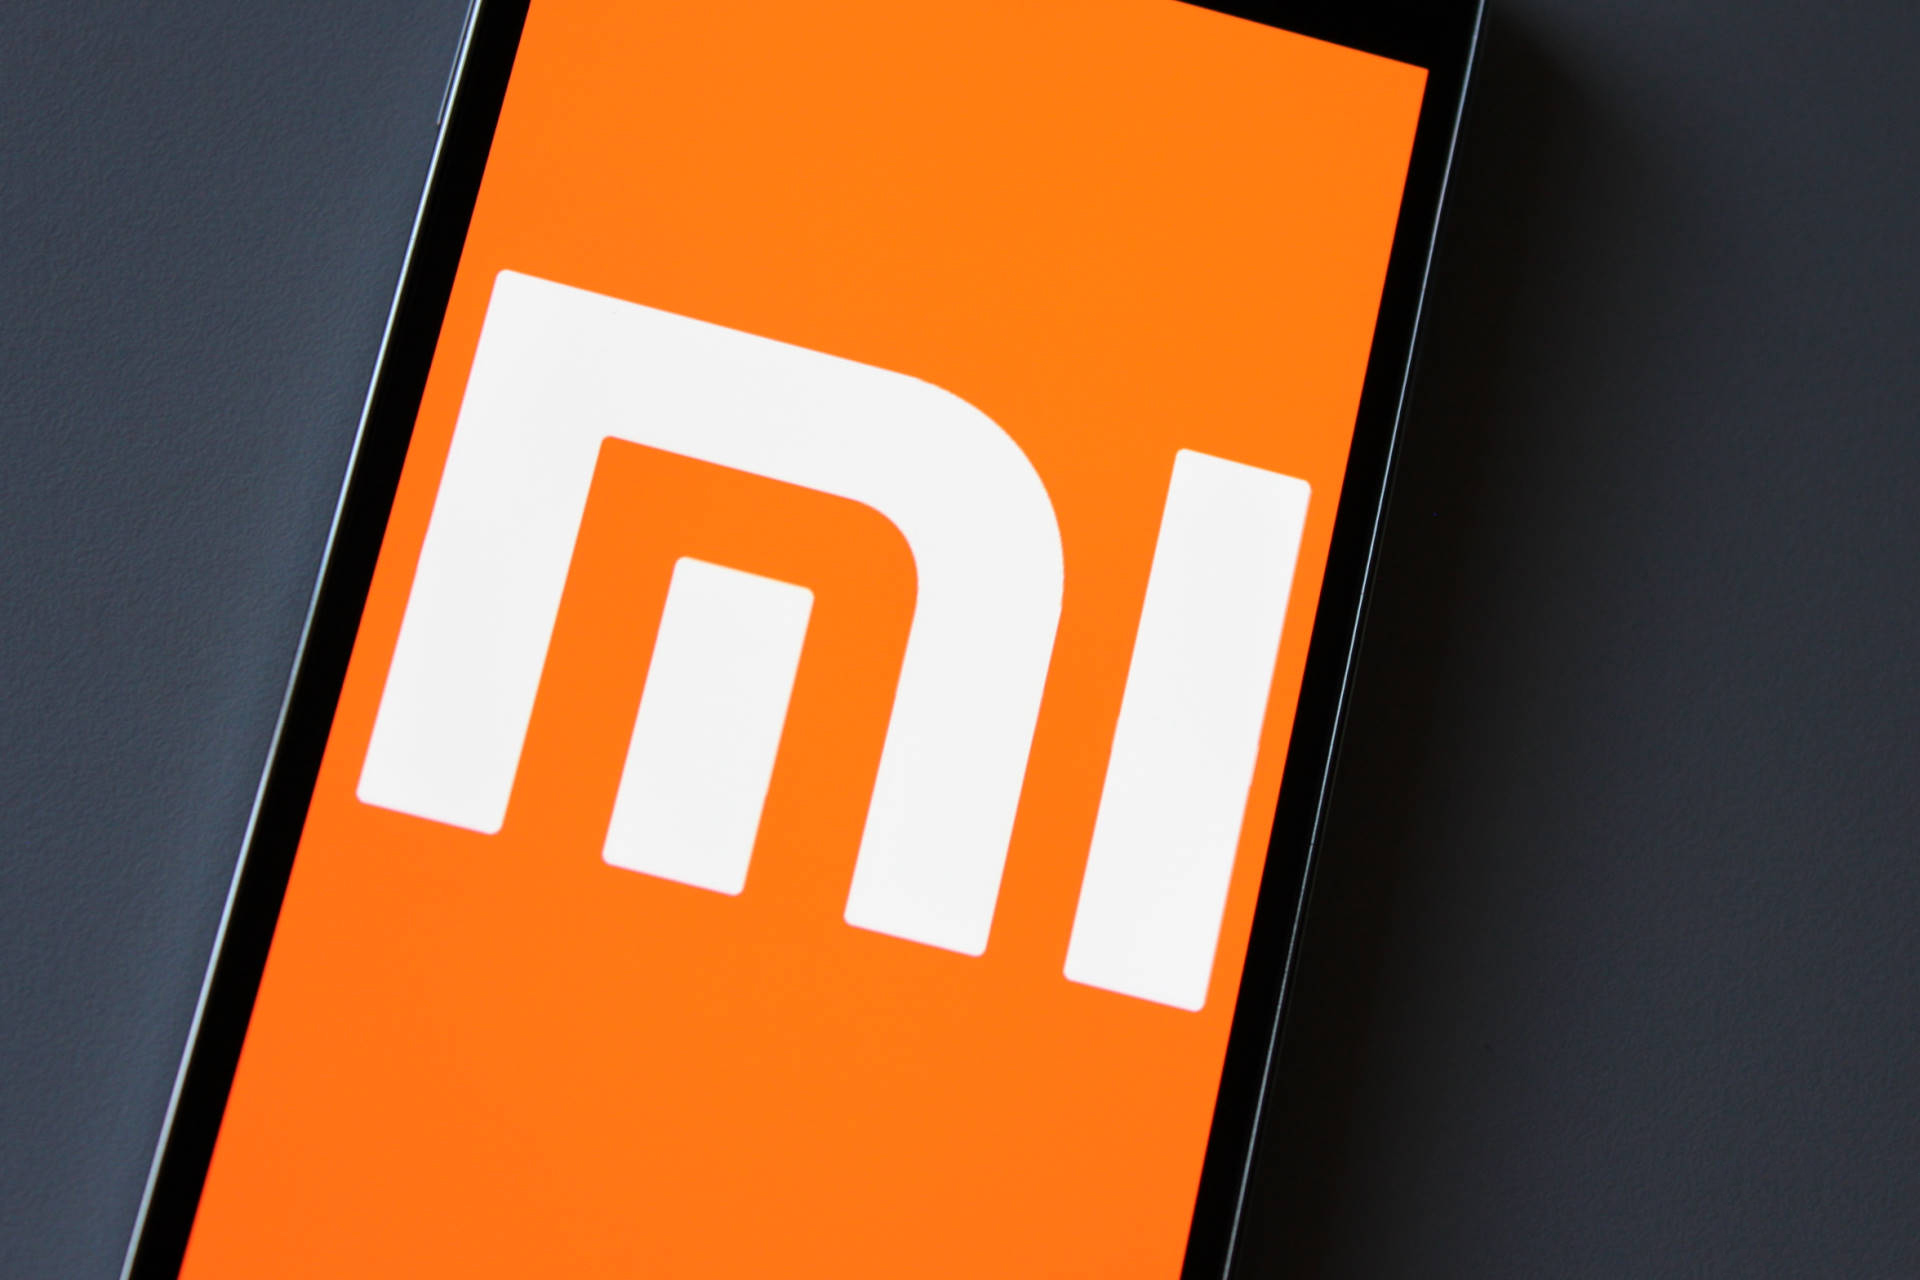 Xiaomi's smartphone sales are going down; Hugo Barra answers